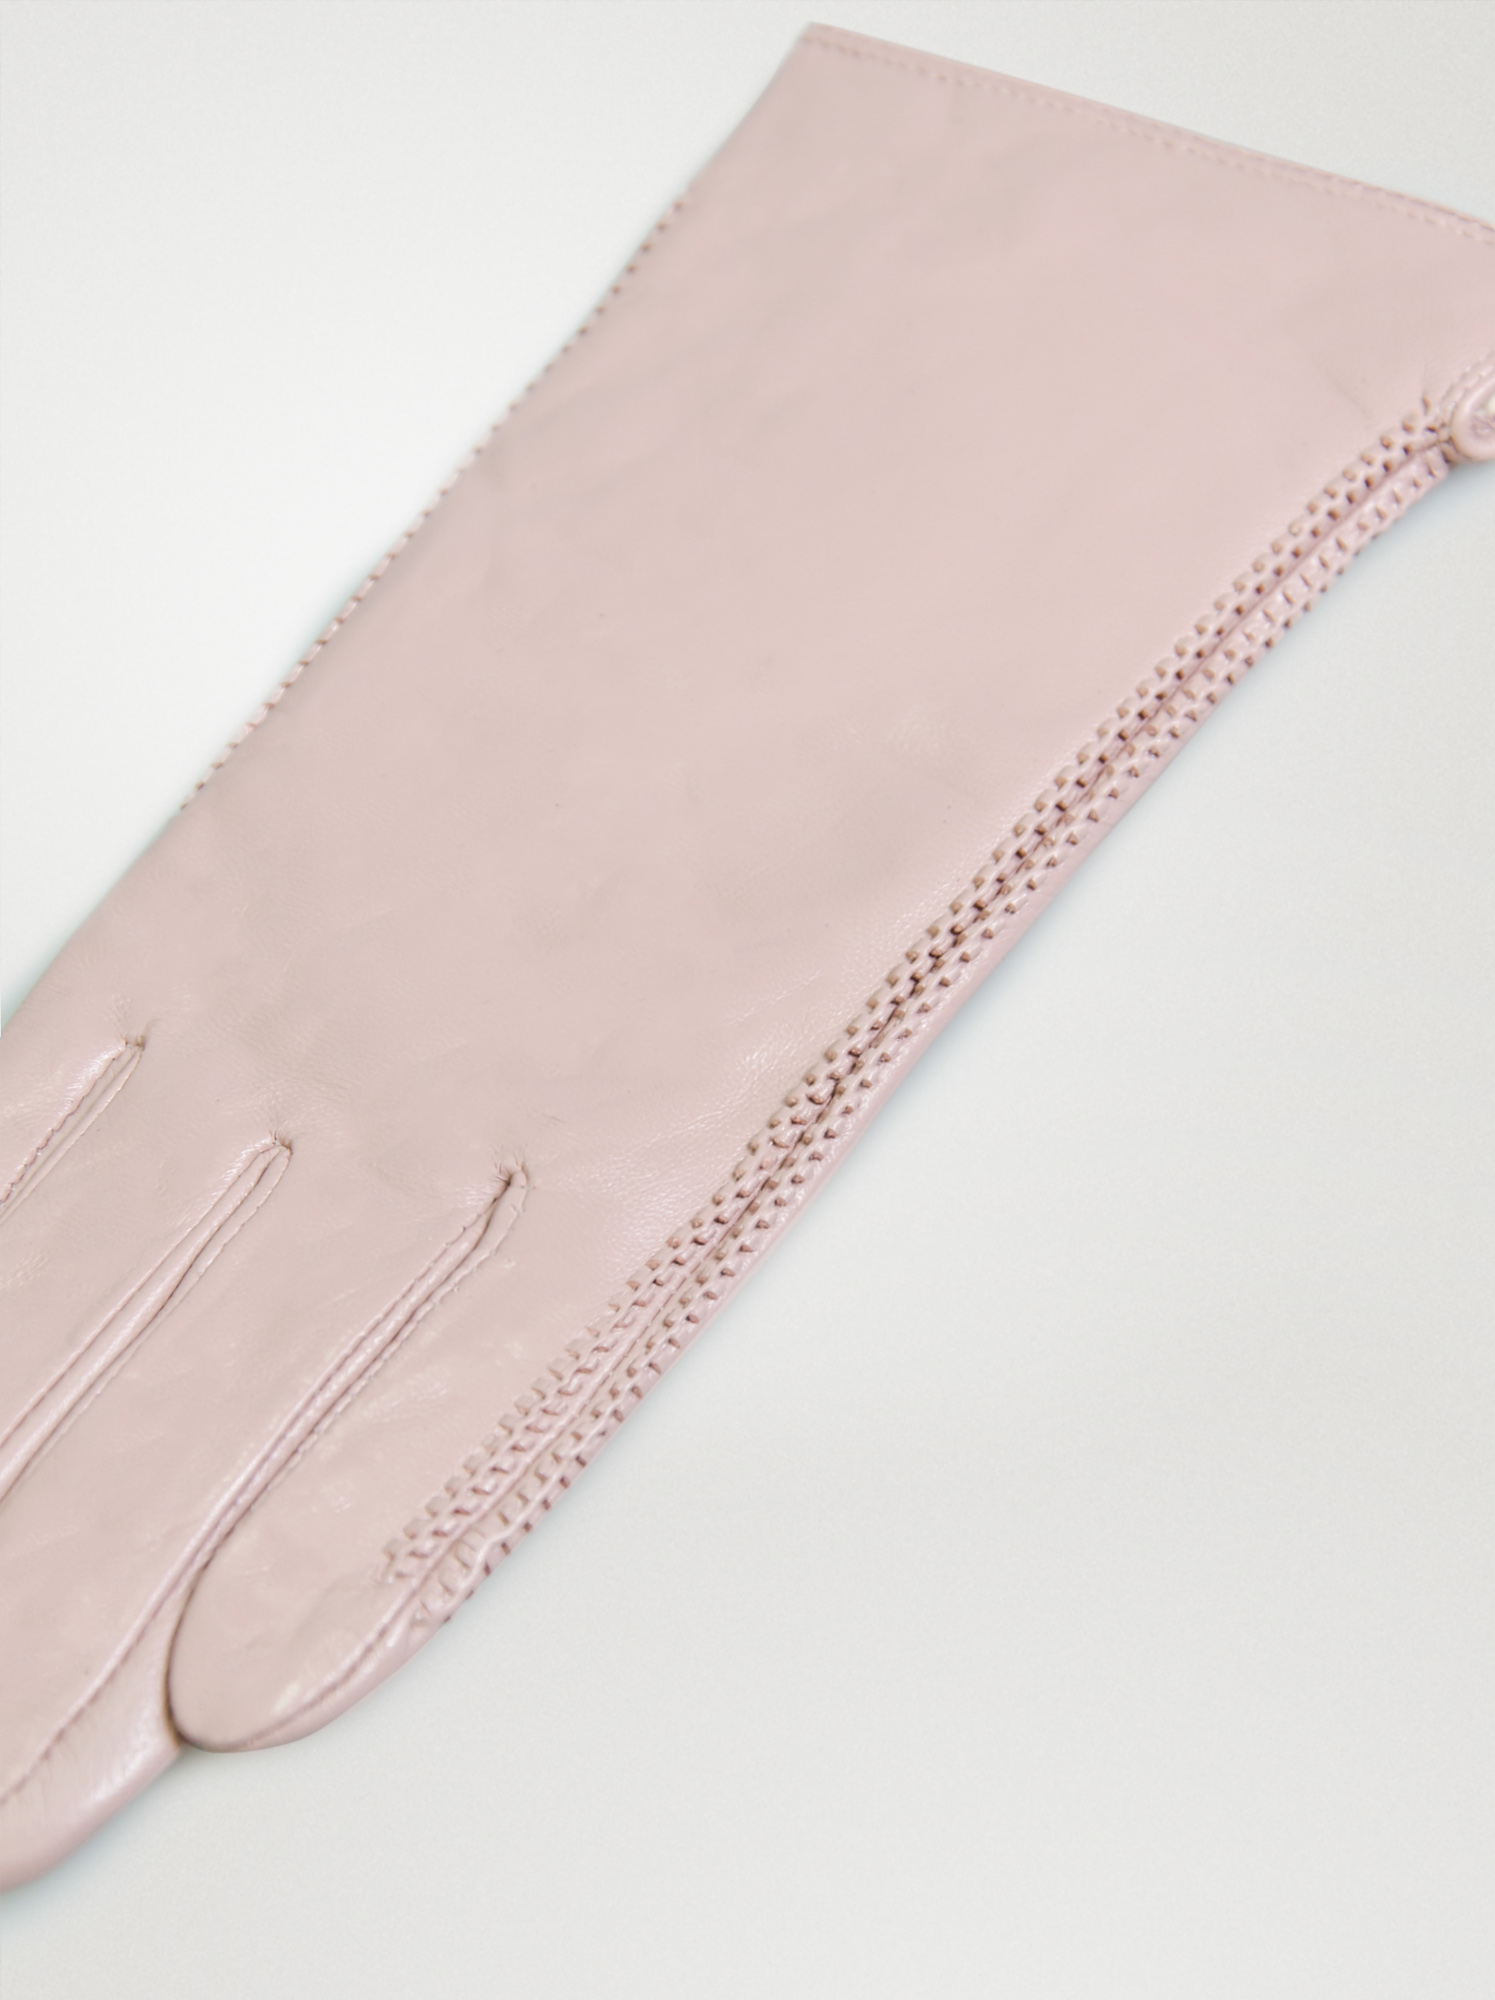 Pink leather gloves - Allora image 3